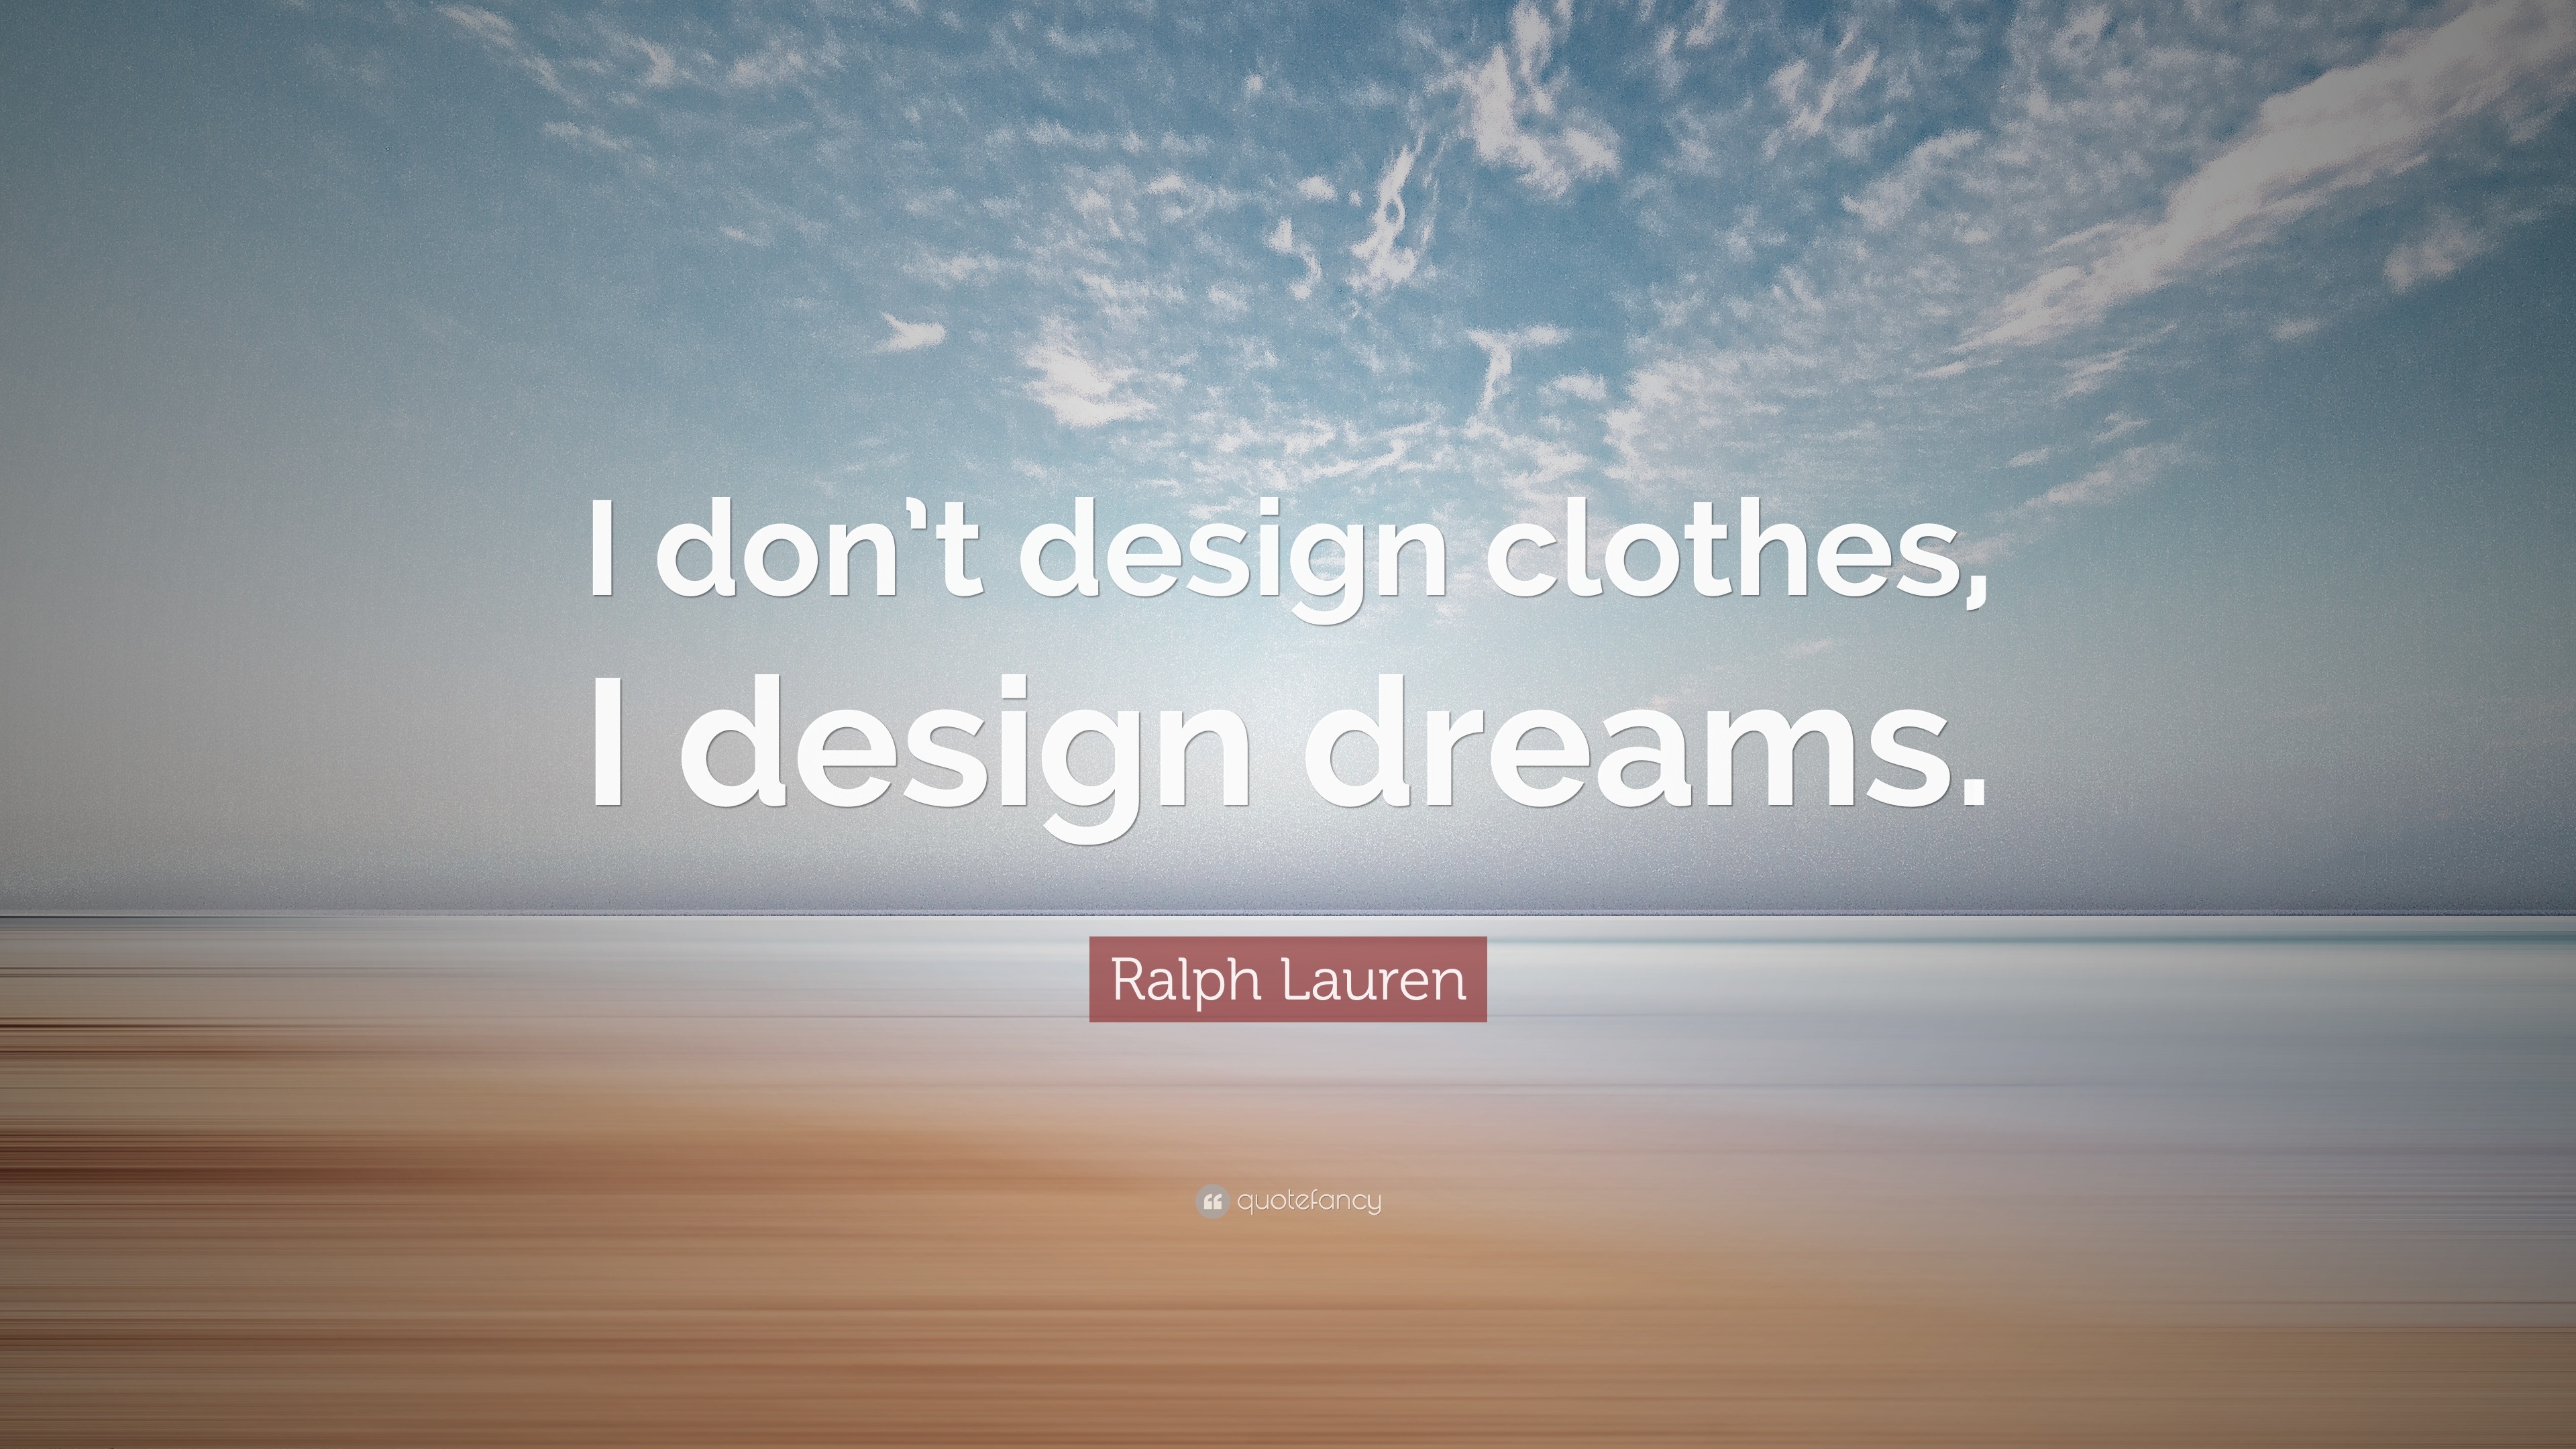 It's not about fabric, it's about dreams': how Ralph Lauren